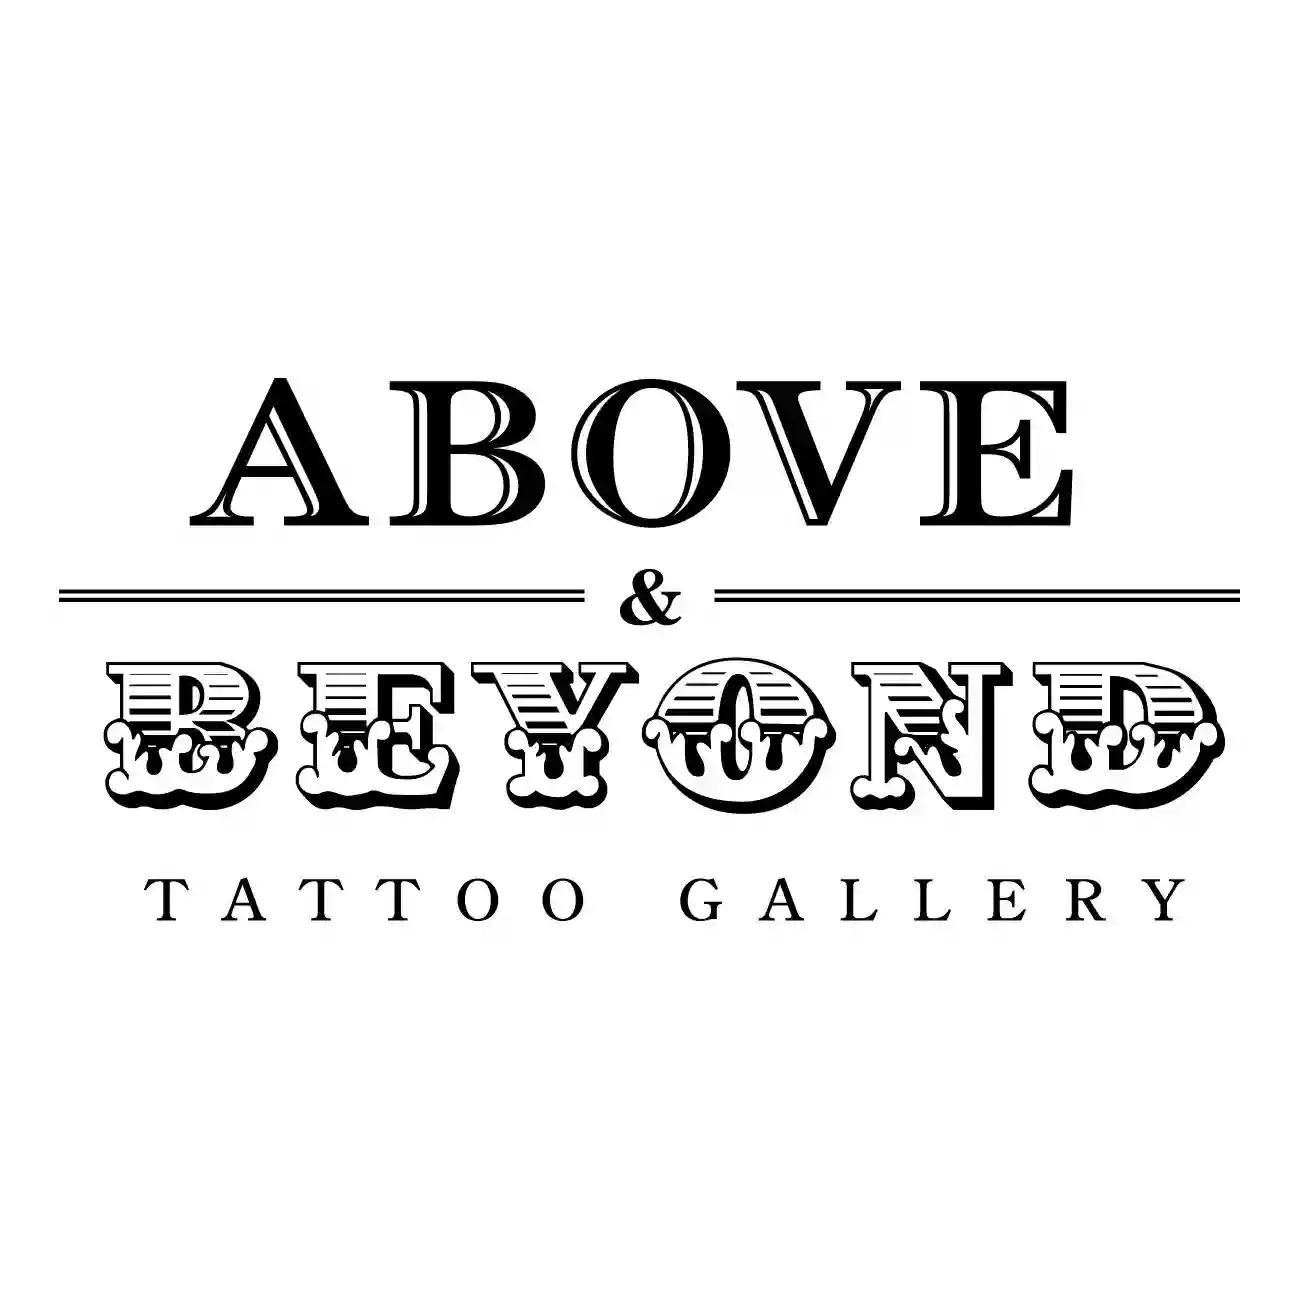 Above & Beyond Tattoo Gallery